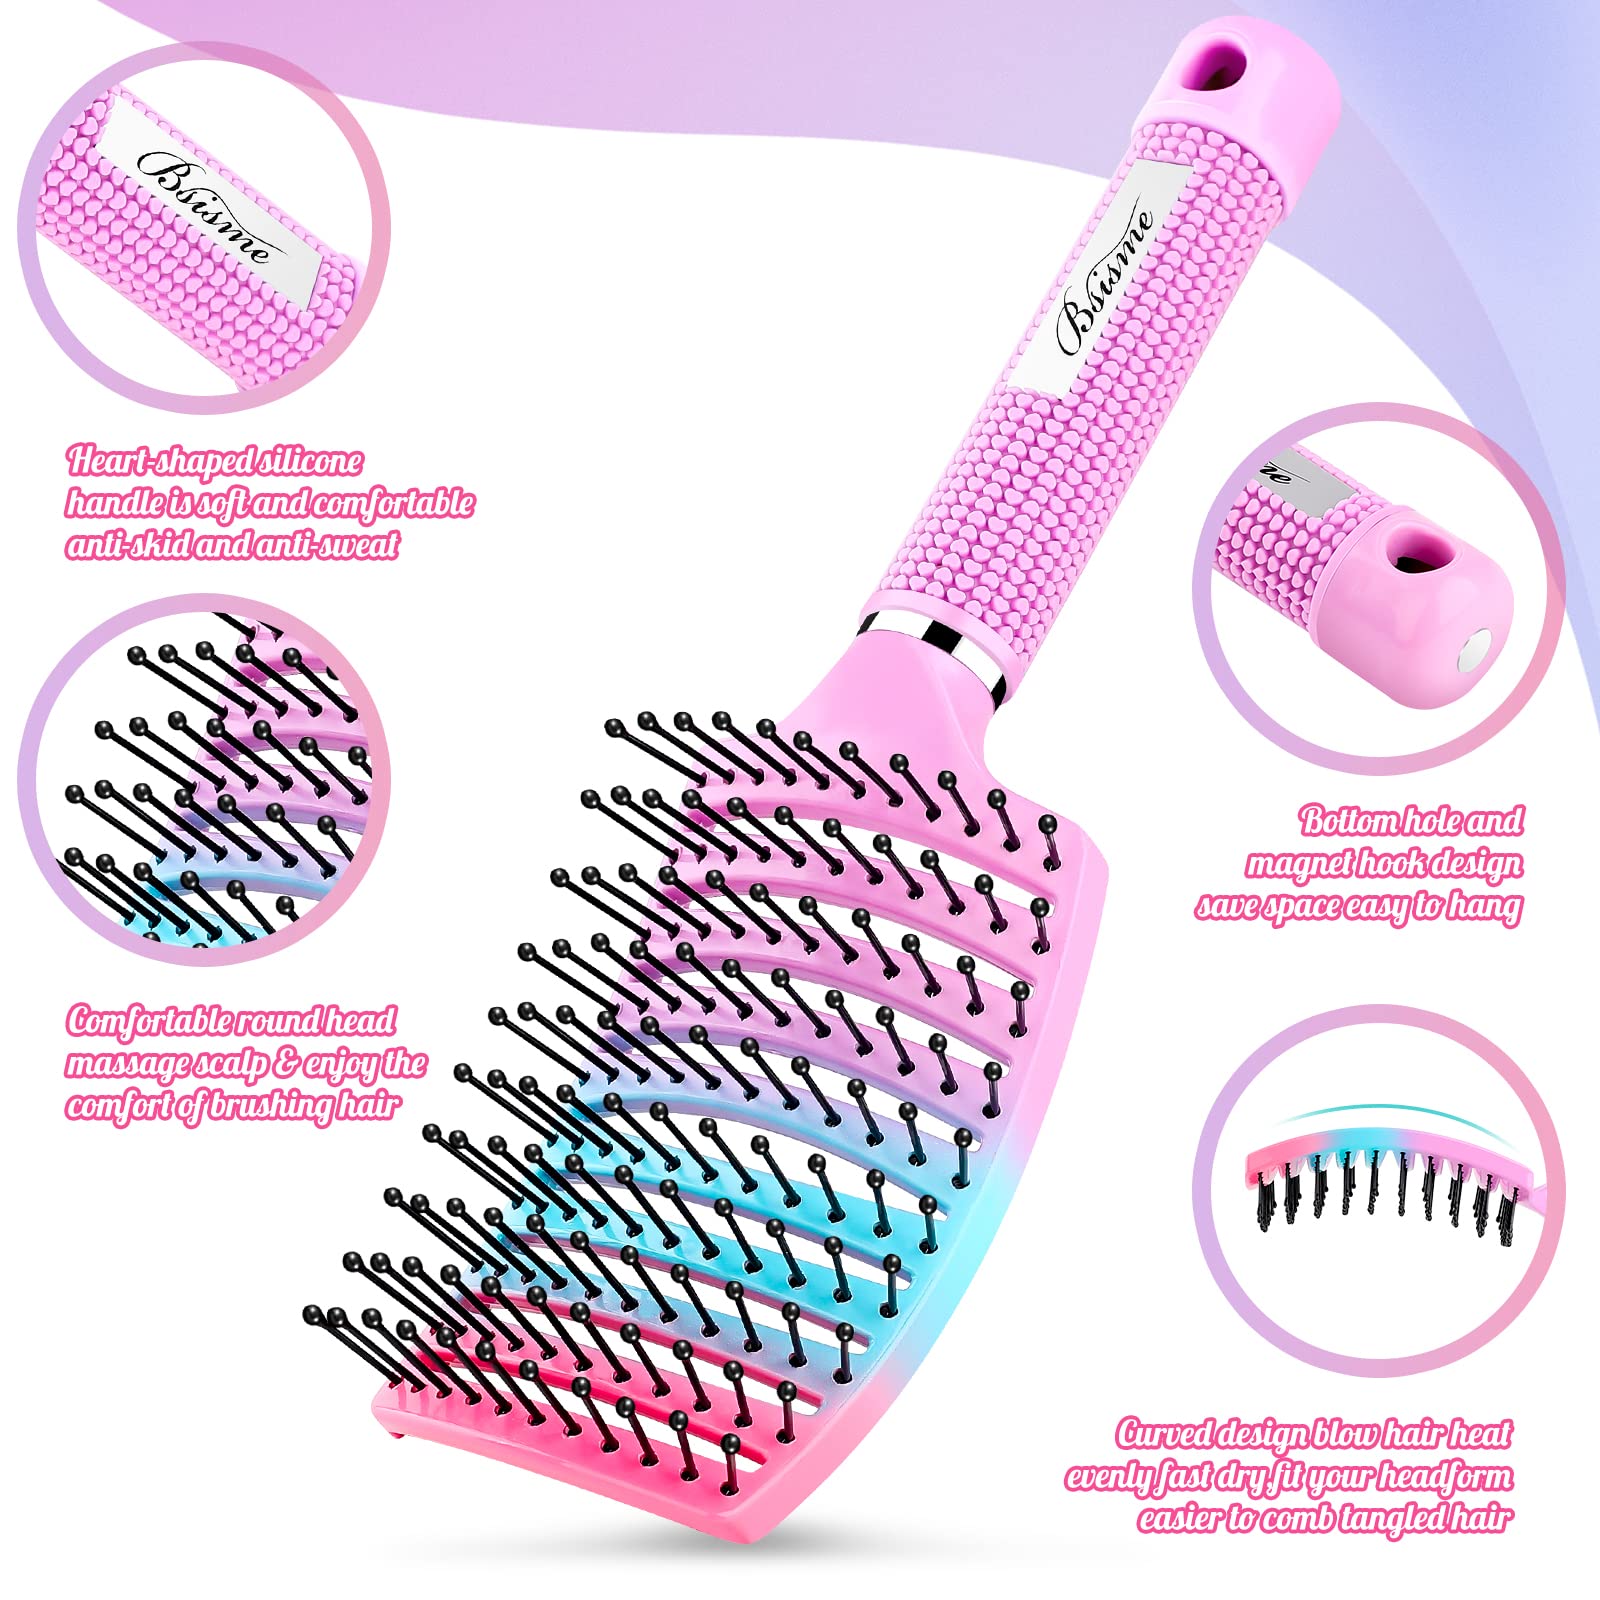 Hair Brush, Curved Vented Brush Faster Blow Drying, Paddle Detangling Hair Brushes for Women Men, Professional Curved Vent Styling Brush for Wet Dry Curly Thick Straight Hair